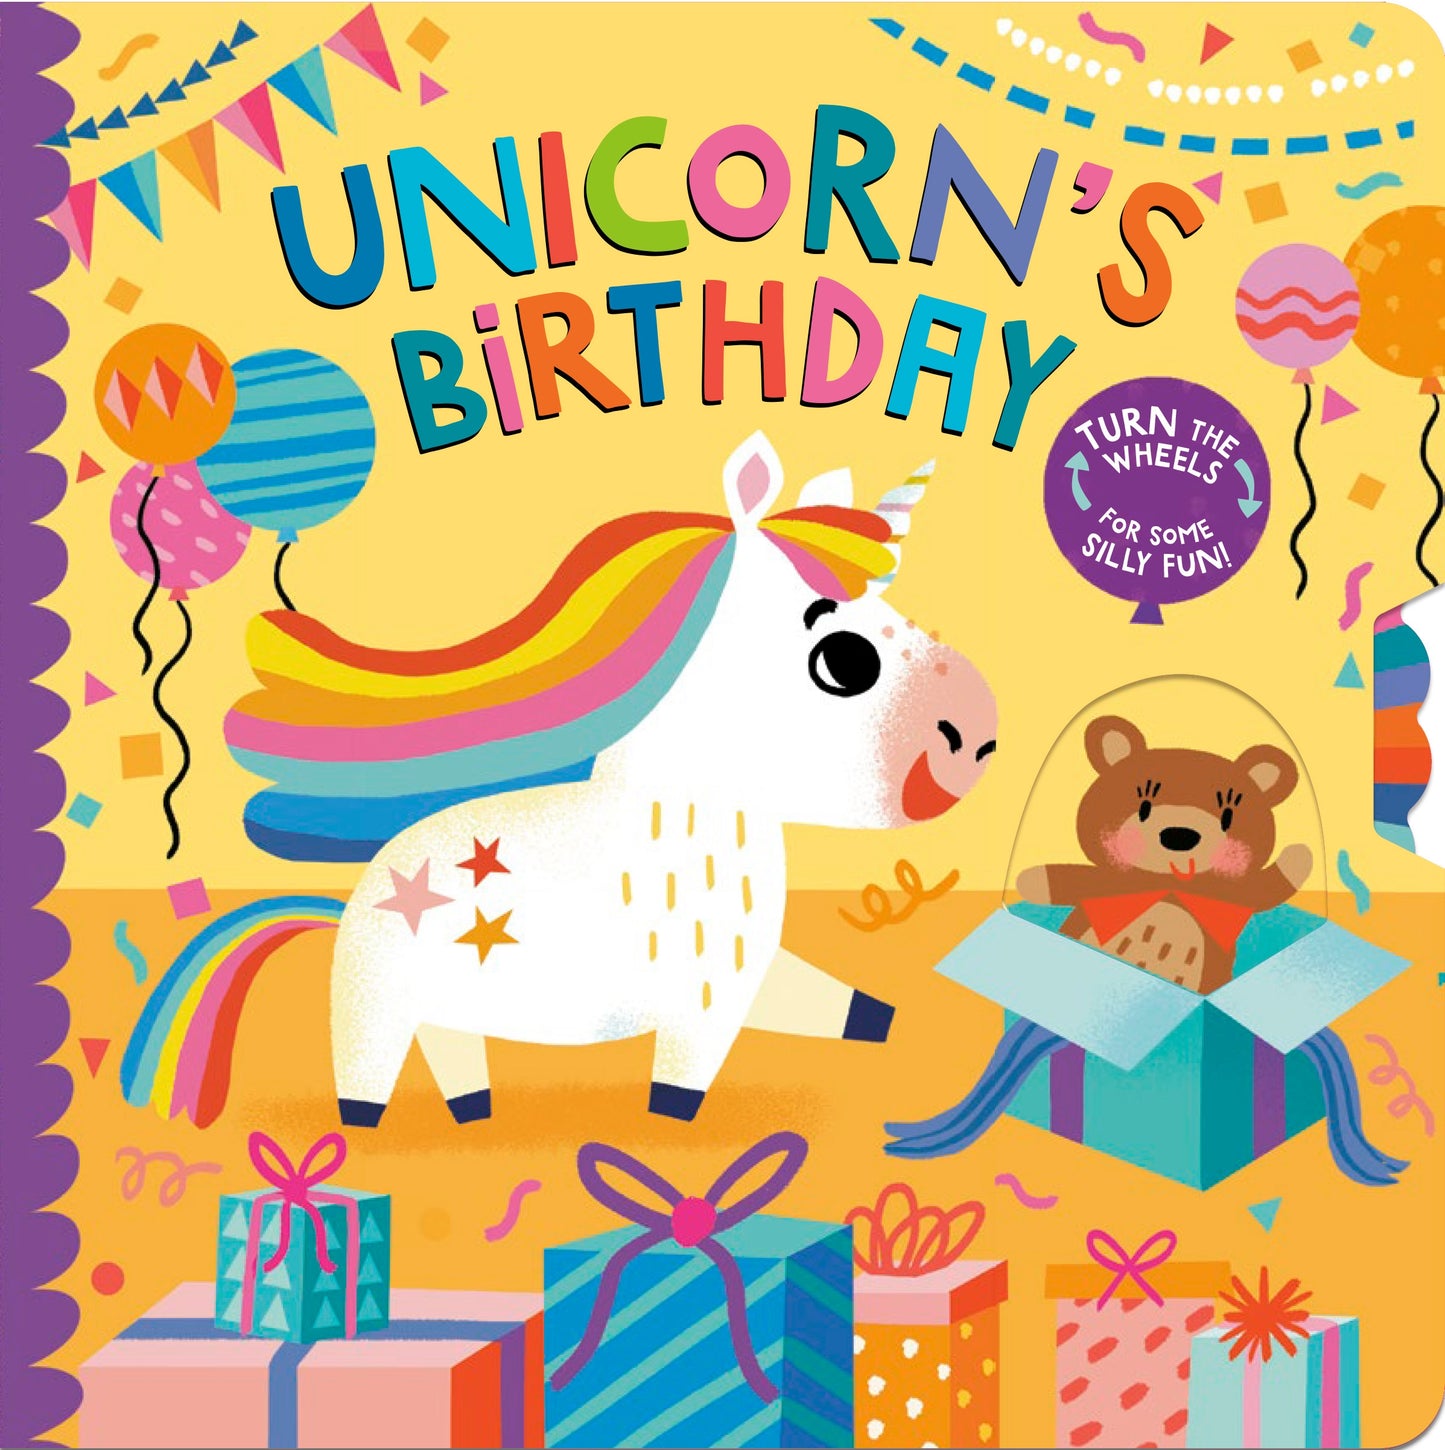 UNICORN'S BIRTHDAY by Lucy Golden - City Books & Lotto